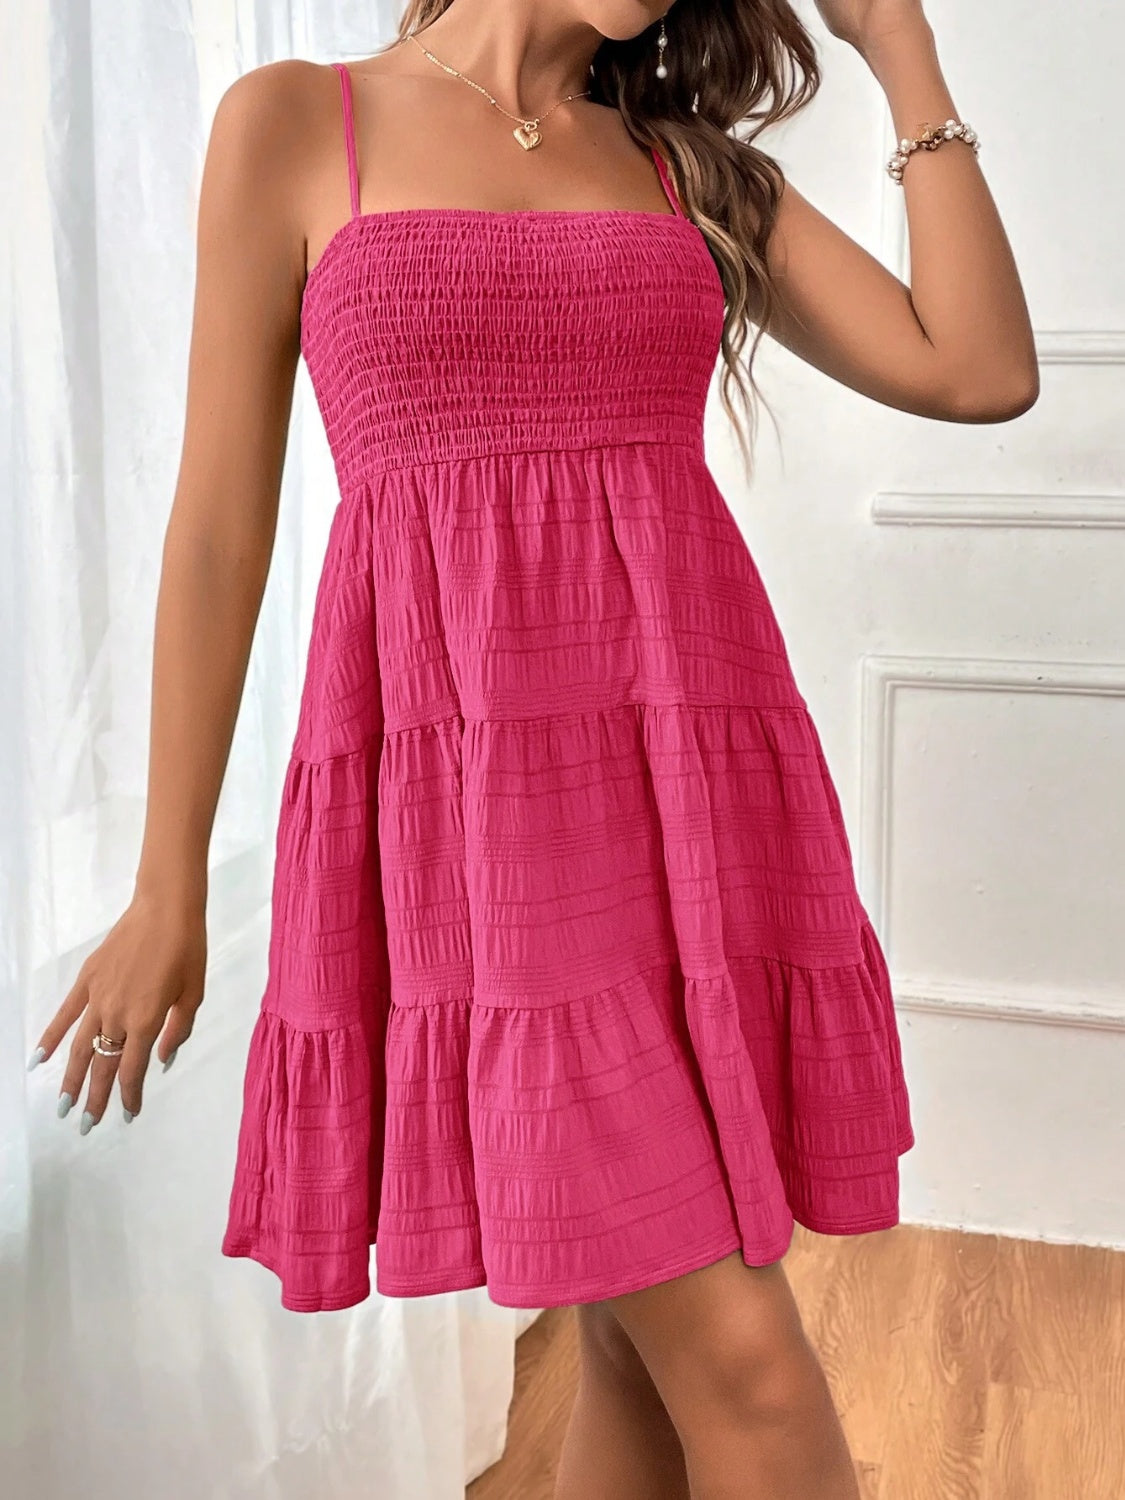 Chic sleeveless mini dress with a smocked bodice and tiered skirt, perfect for summer. Available in 8 colors for any occasion.